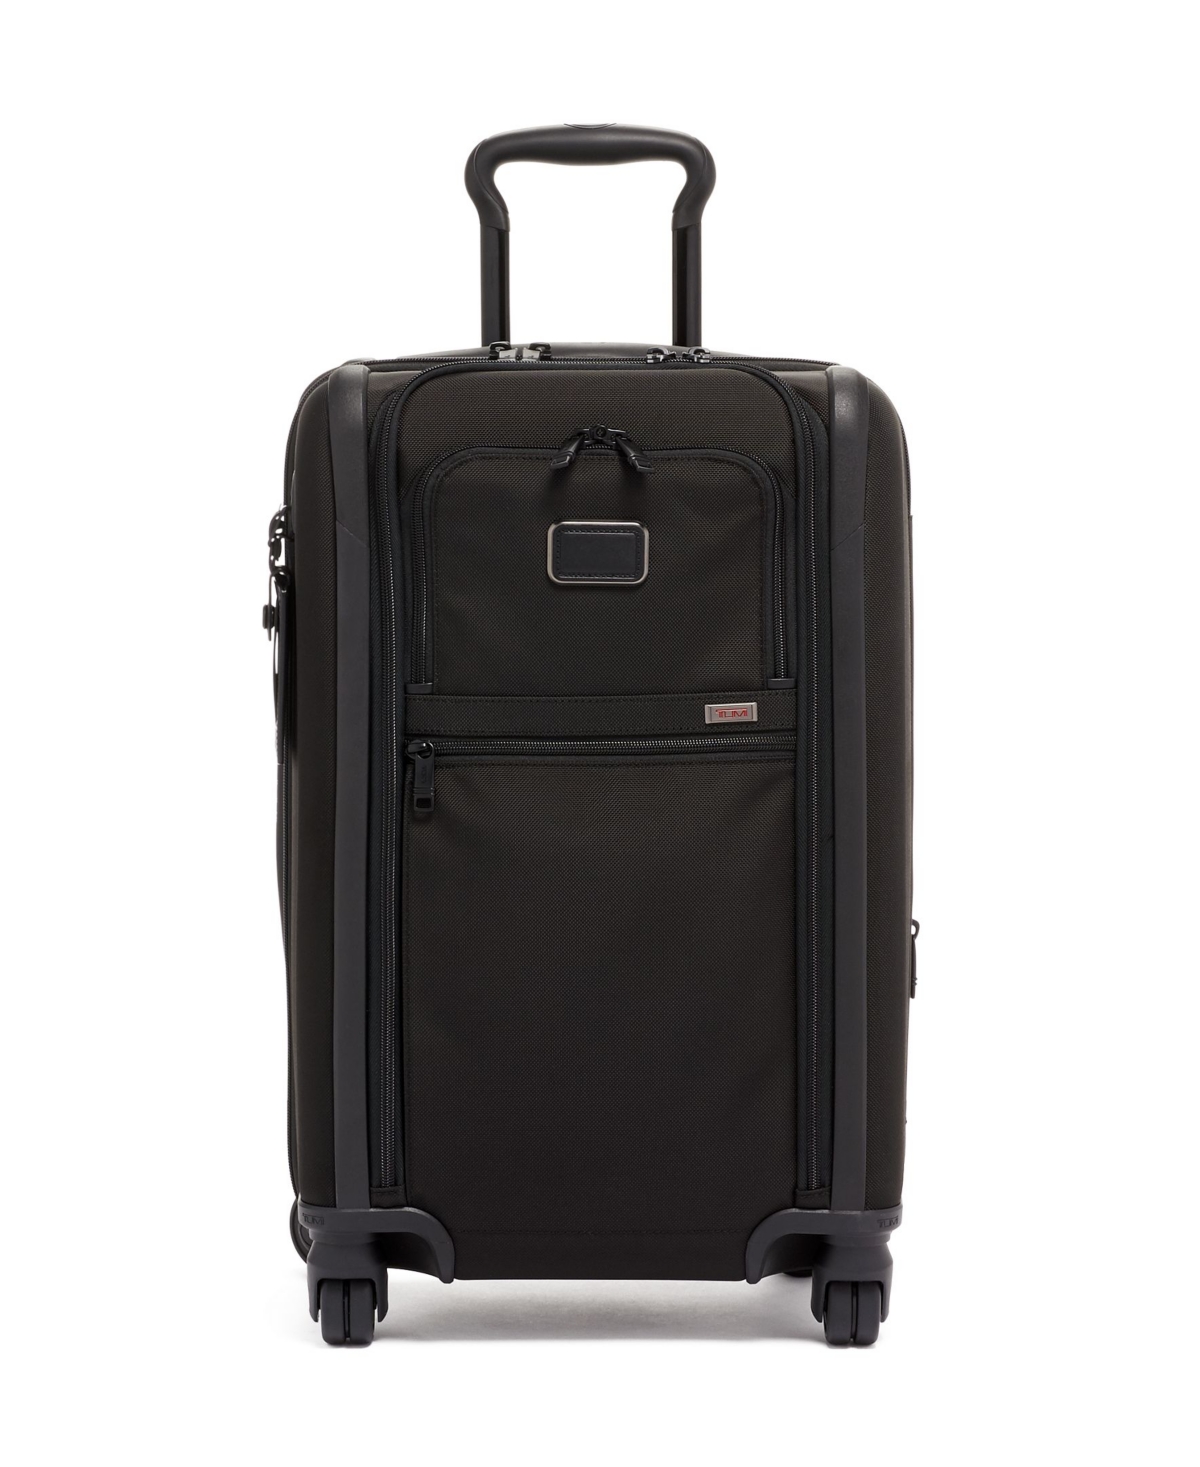 Alpha 3 International Expandable 4 Wheeled Carry-On Spinner Suitcase - Anthracite